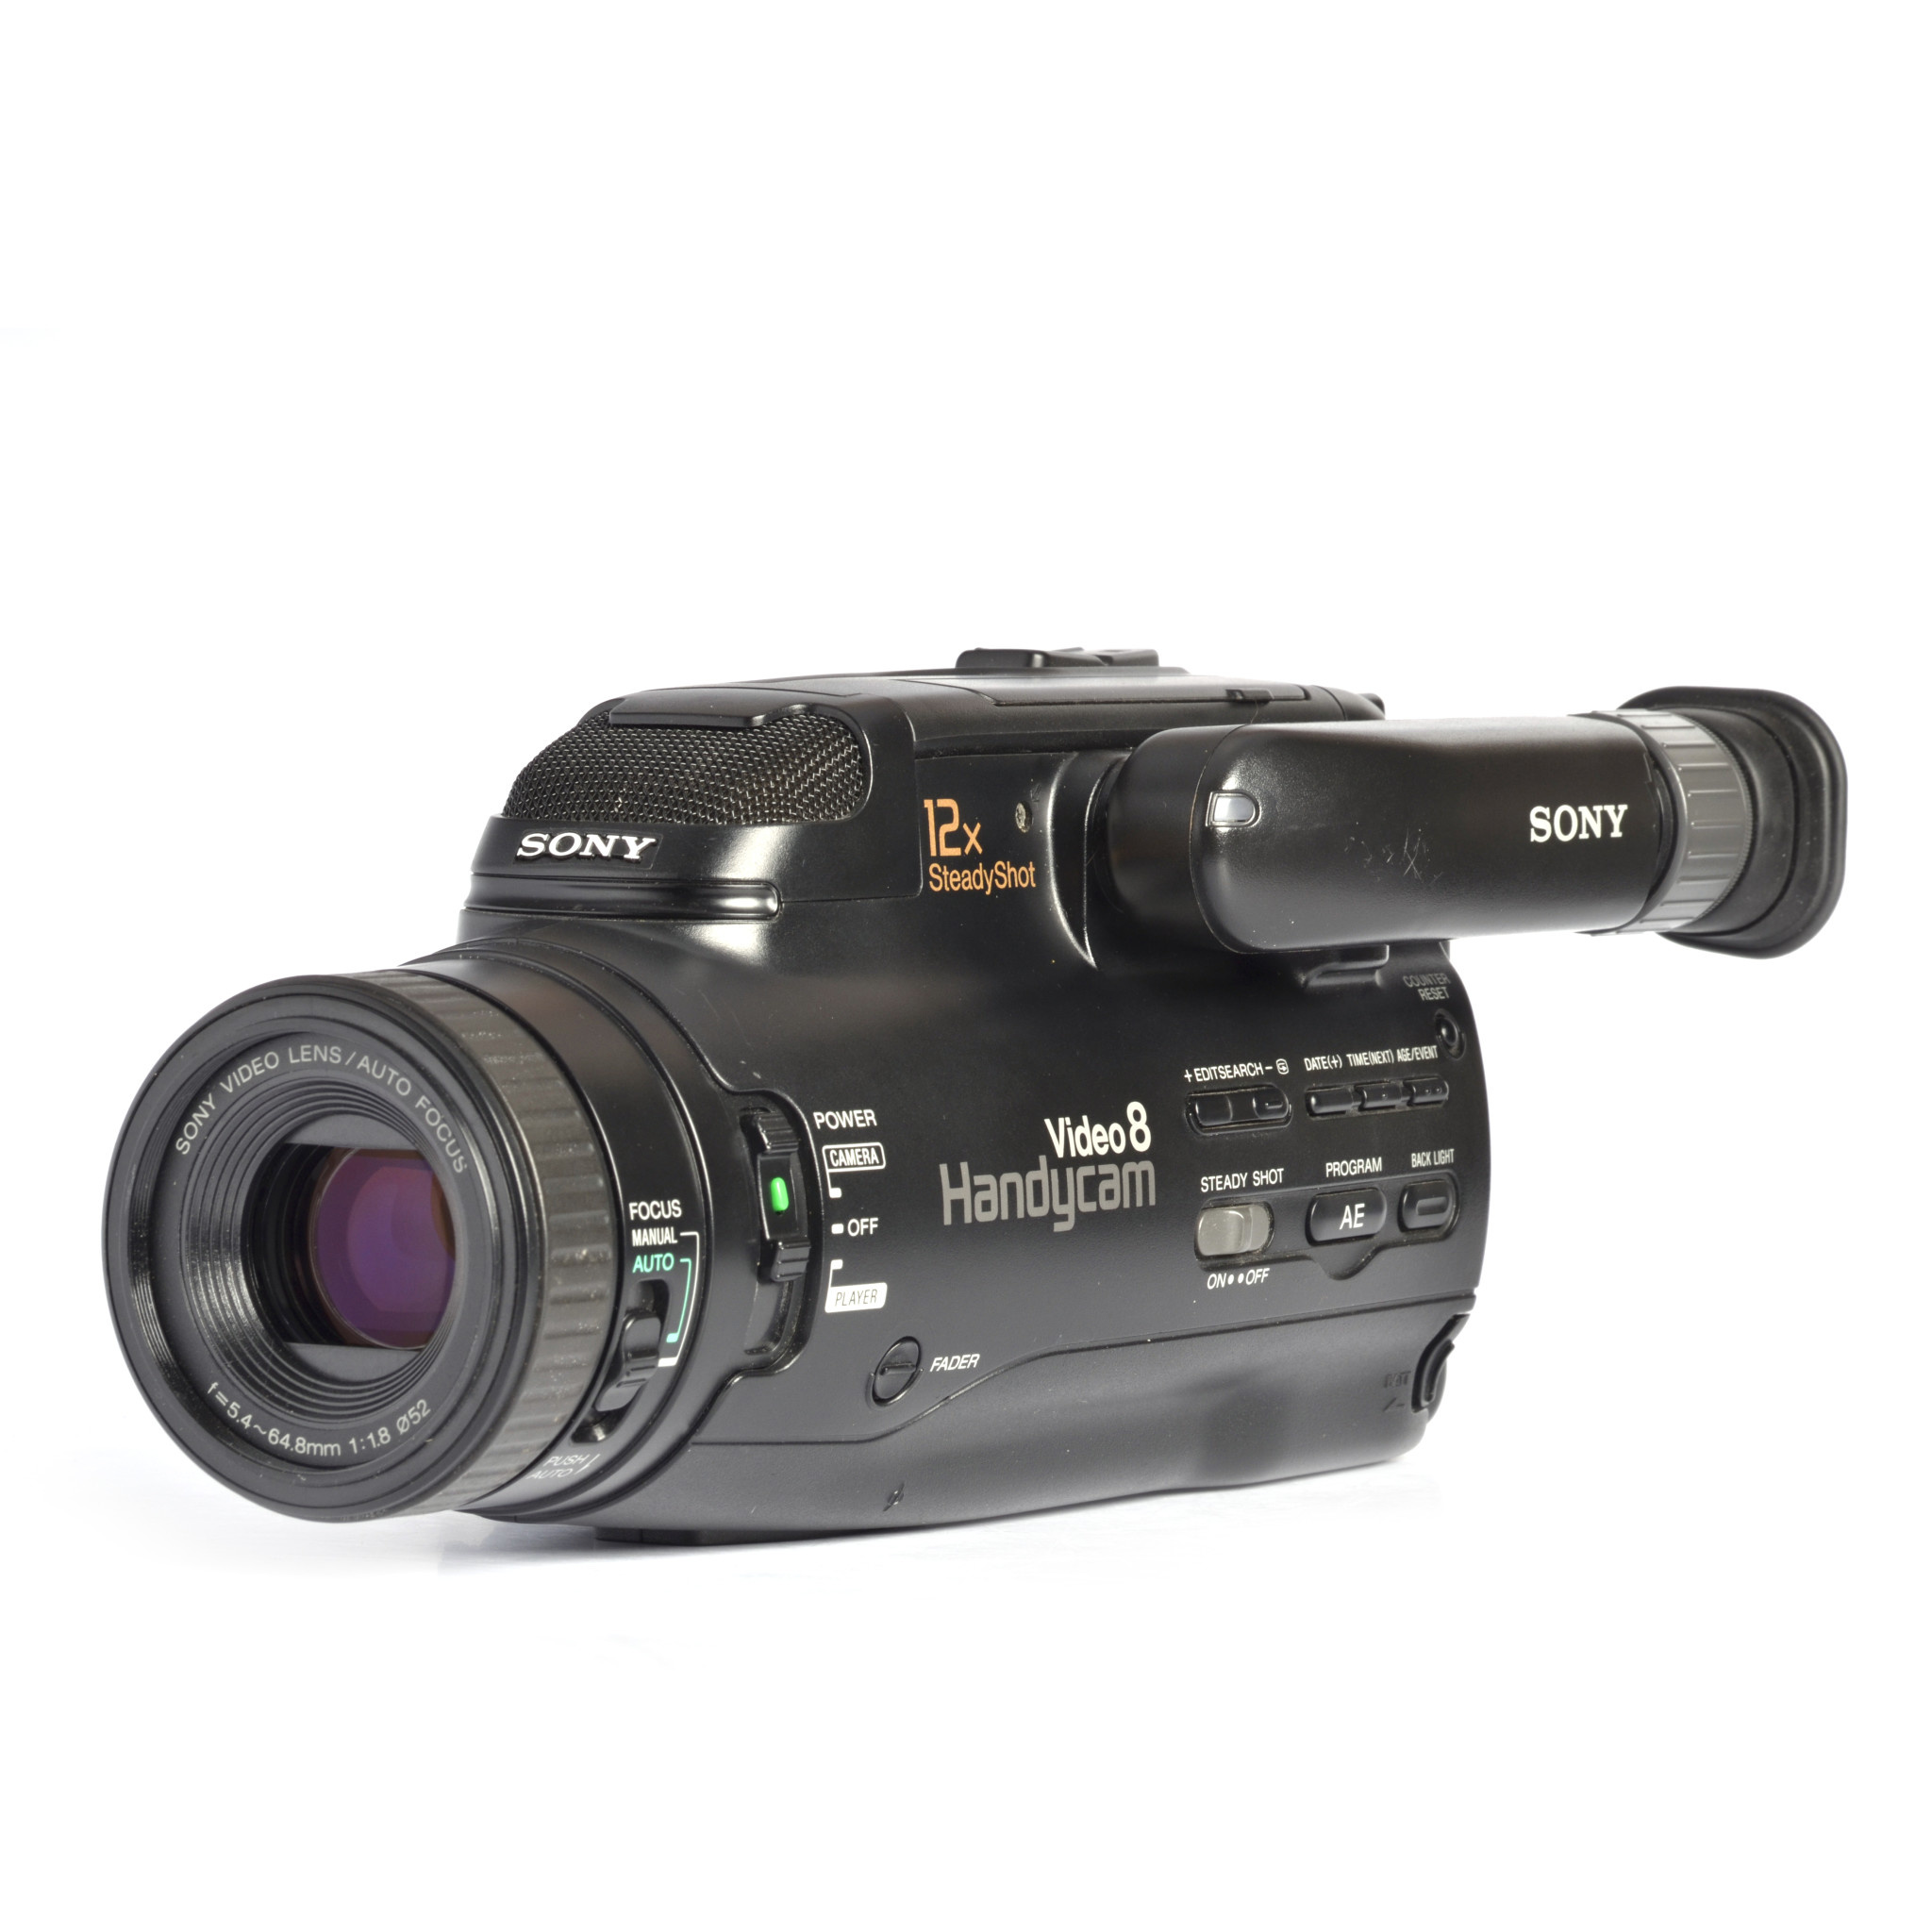 Sony Sony Video 8 Handycam CCD-FX630 - LeZot Camera | Sales and